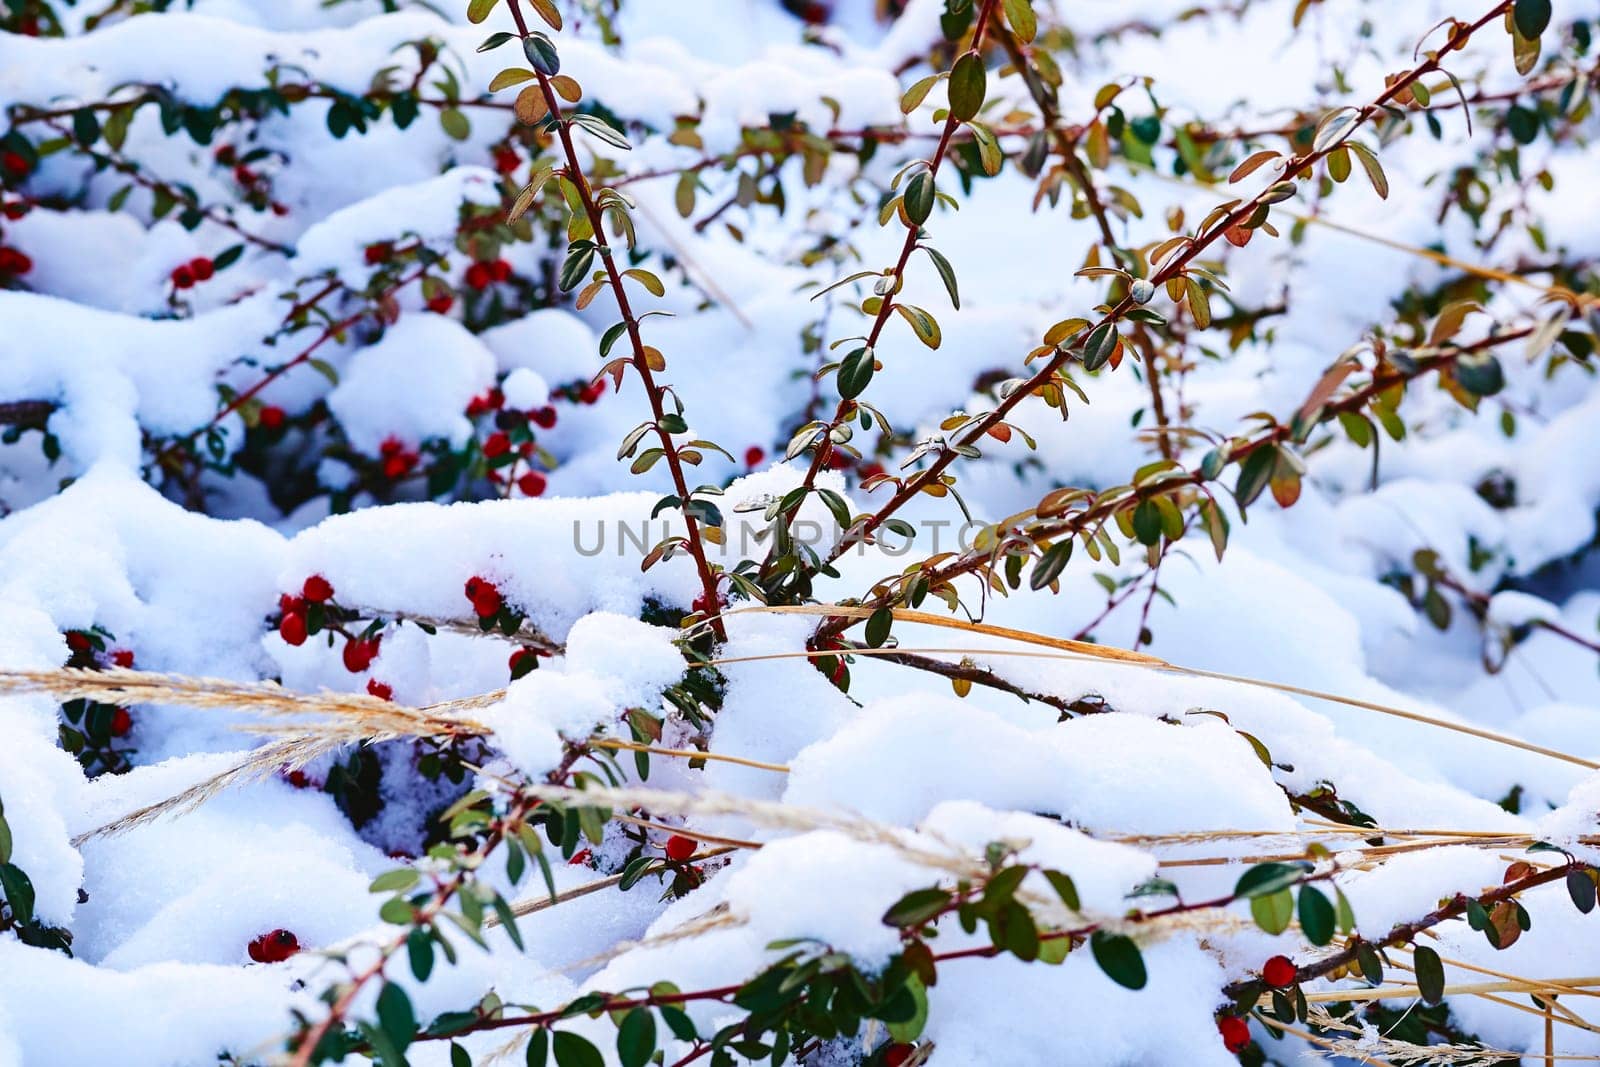 Green viable decorative bushes with red berries covered with snow by jovani68